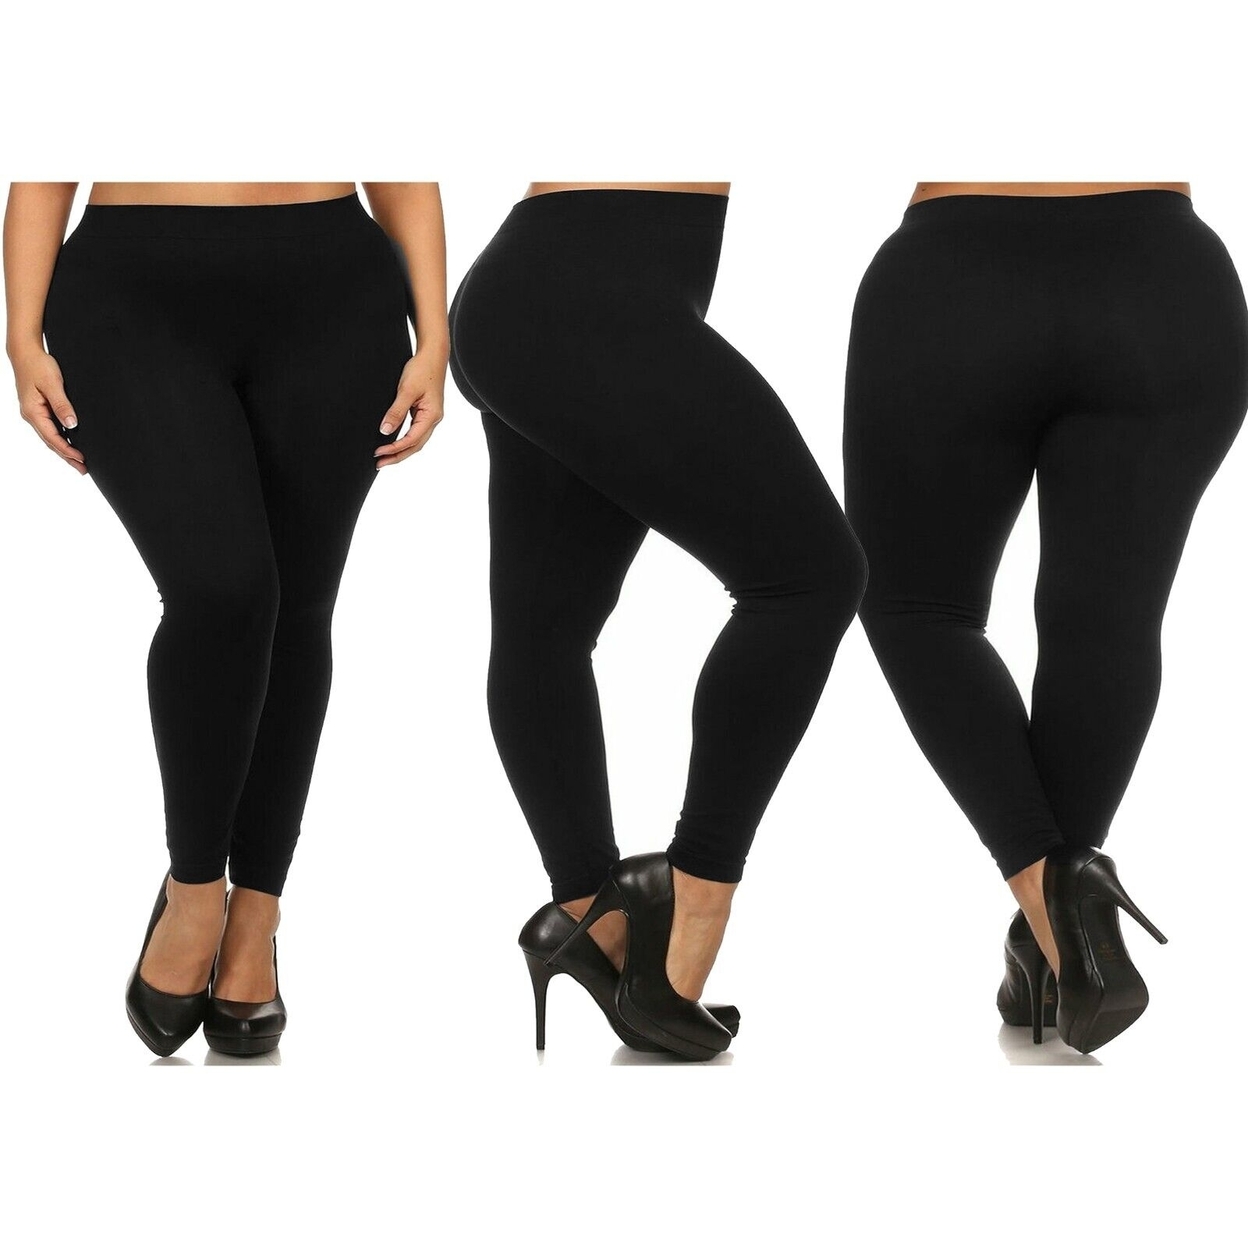 3-Pack: Women's Casual Ultra-Soft Smooth High Waisted Athletic Active Yoga Leggings Plus Size Available - Black,black,black, 2x